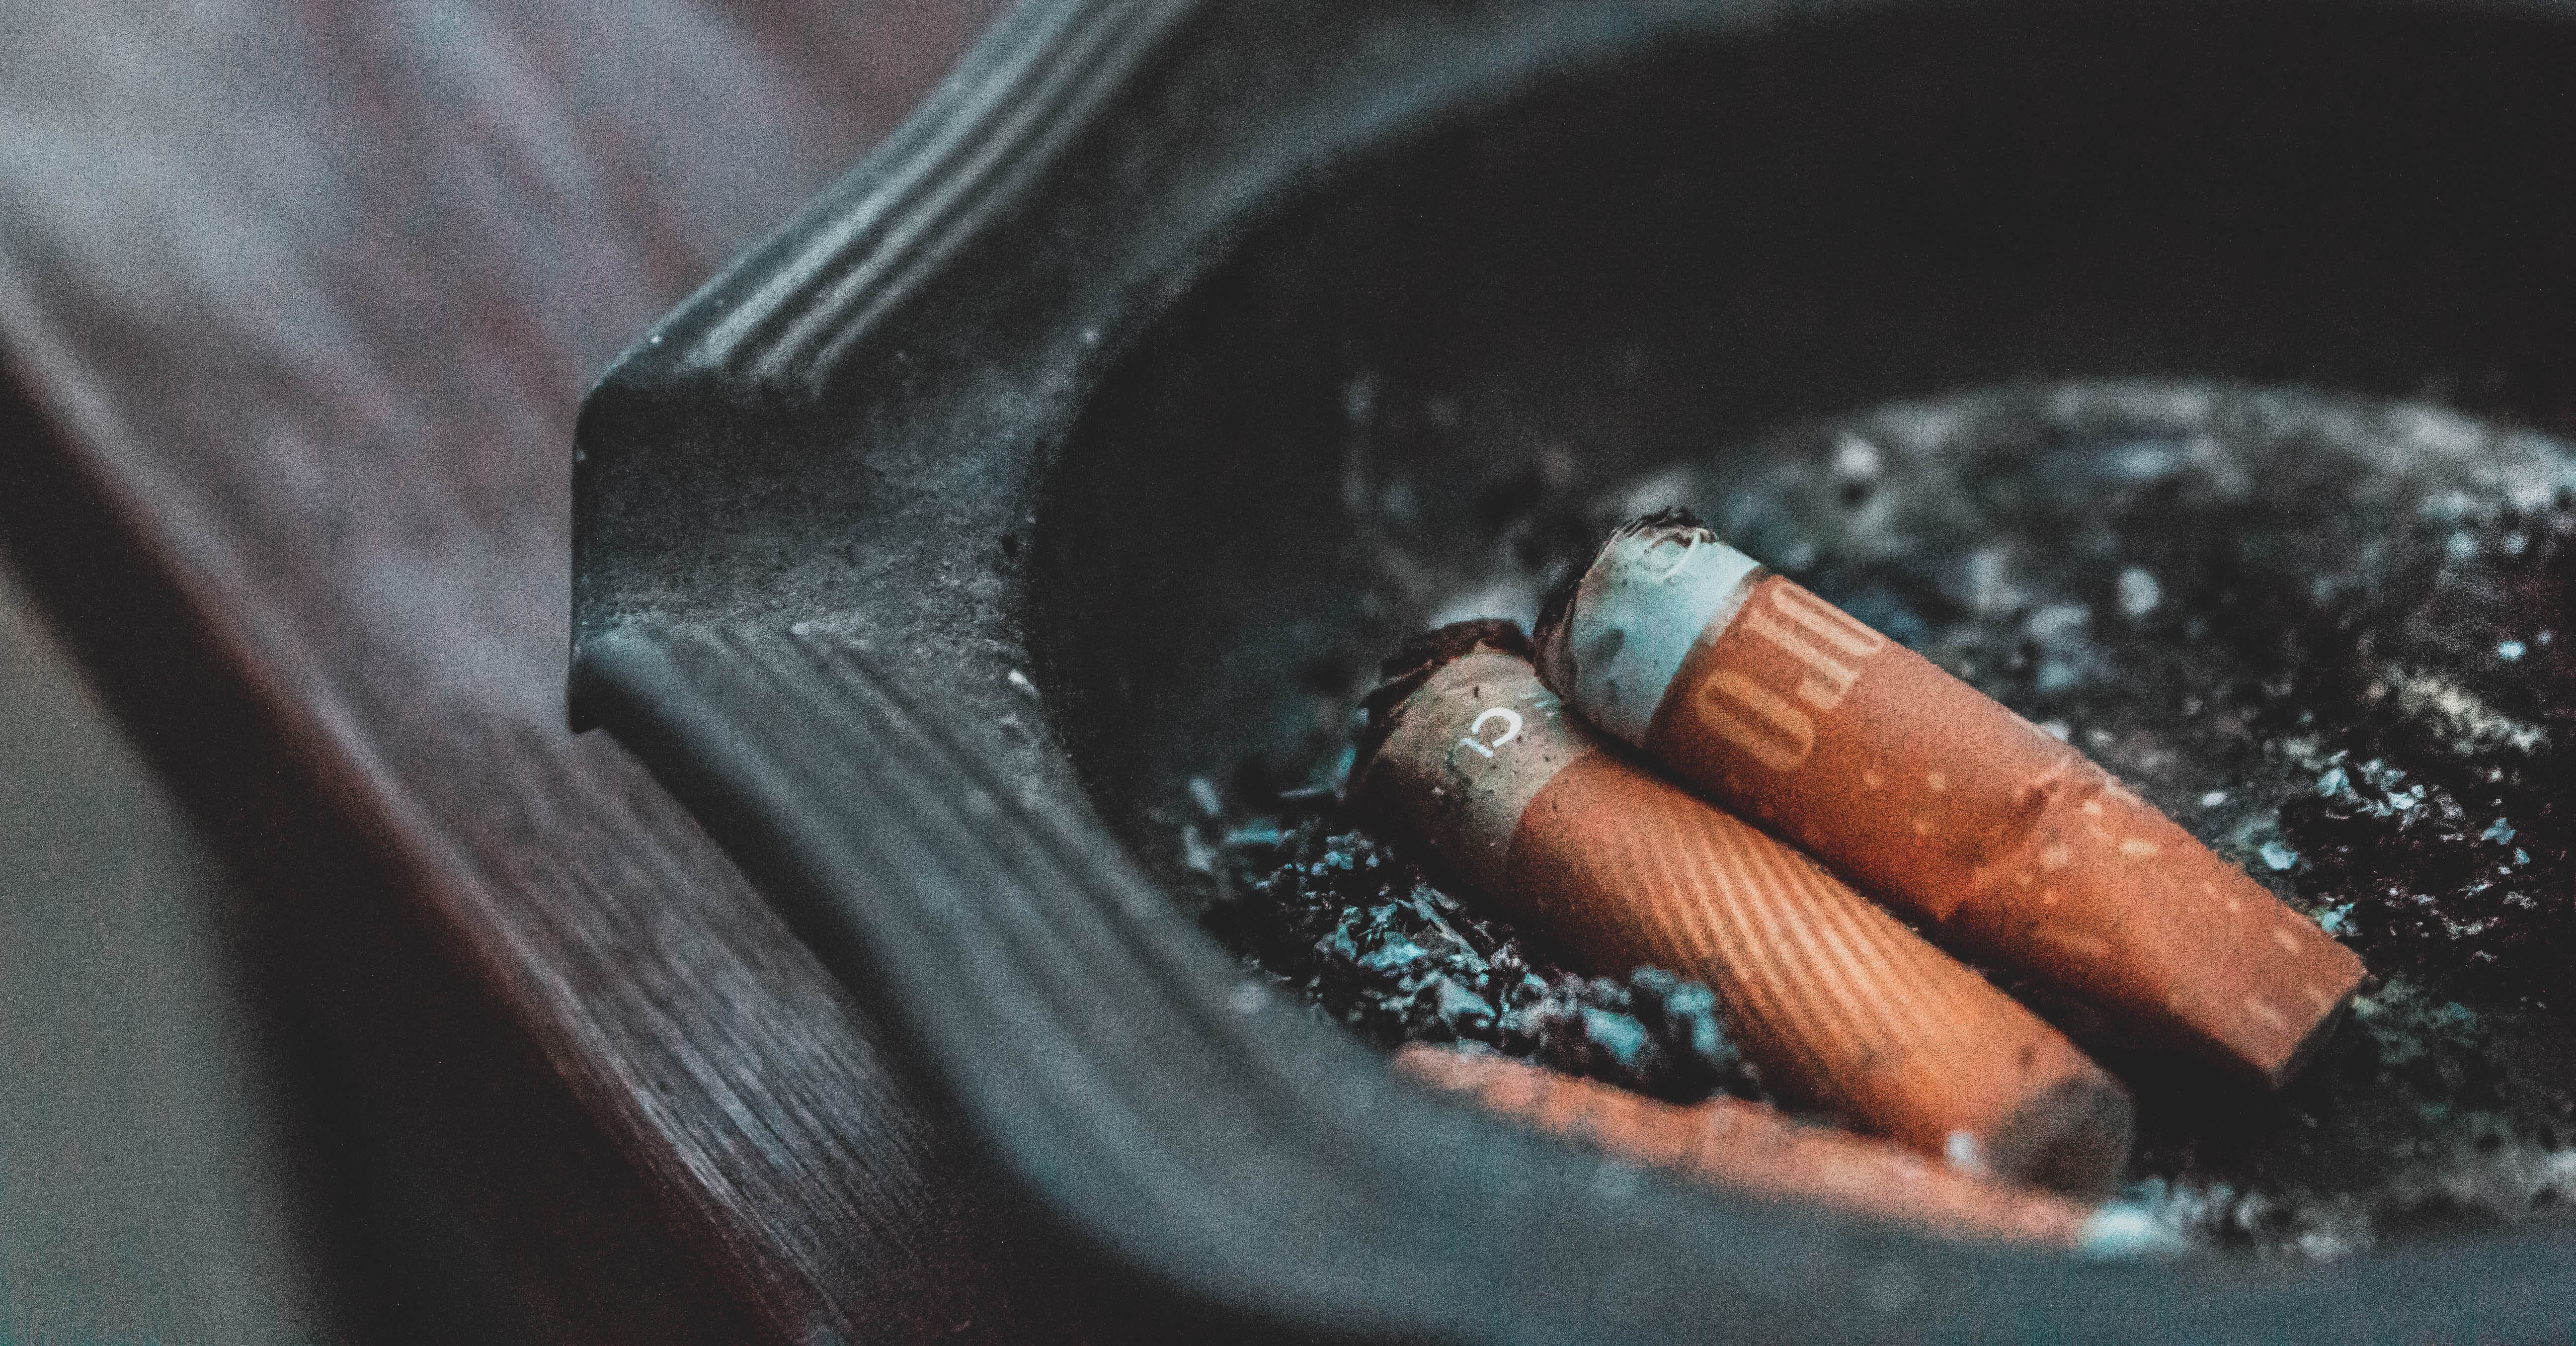 Two cigarettes sit in a black ashtray on a wood surface.